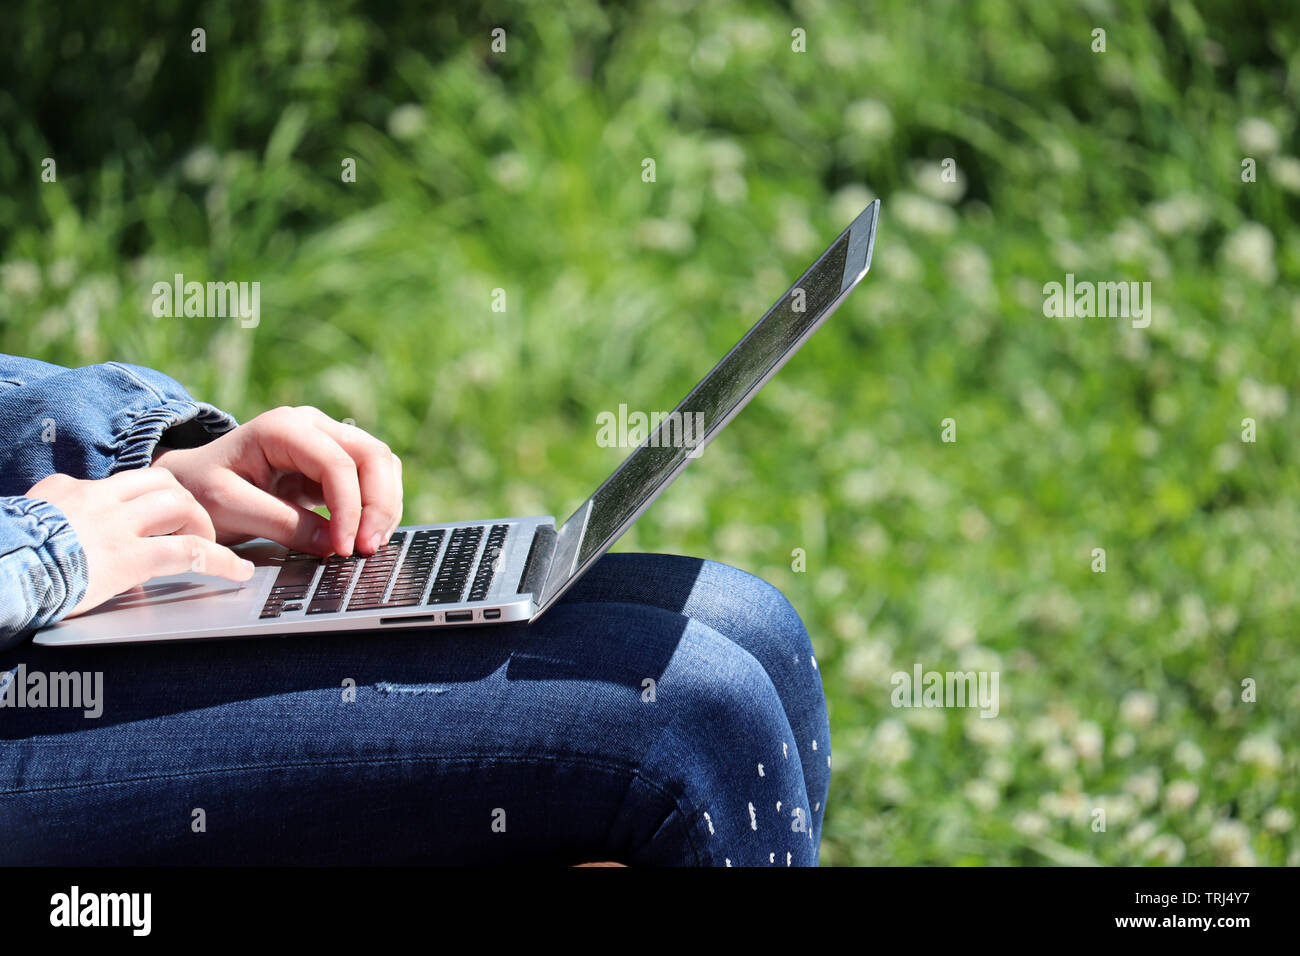 Woman sitting with a laptop on a bench in a summer park. Female hands on a keyboard, concept of student, working outdoor, businesswoman, online Stock Photo